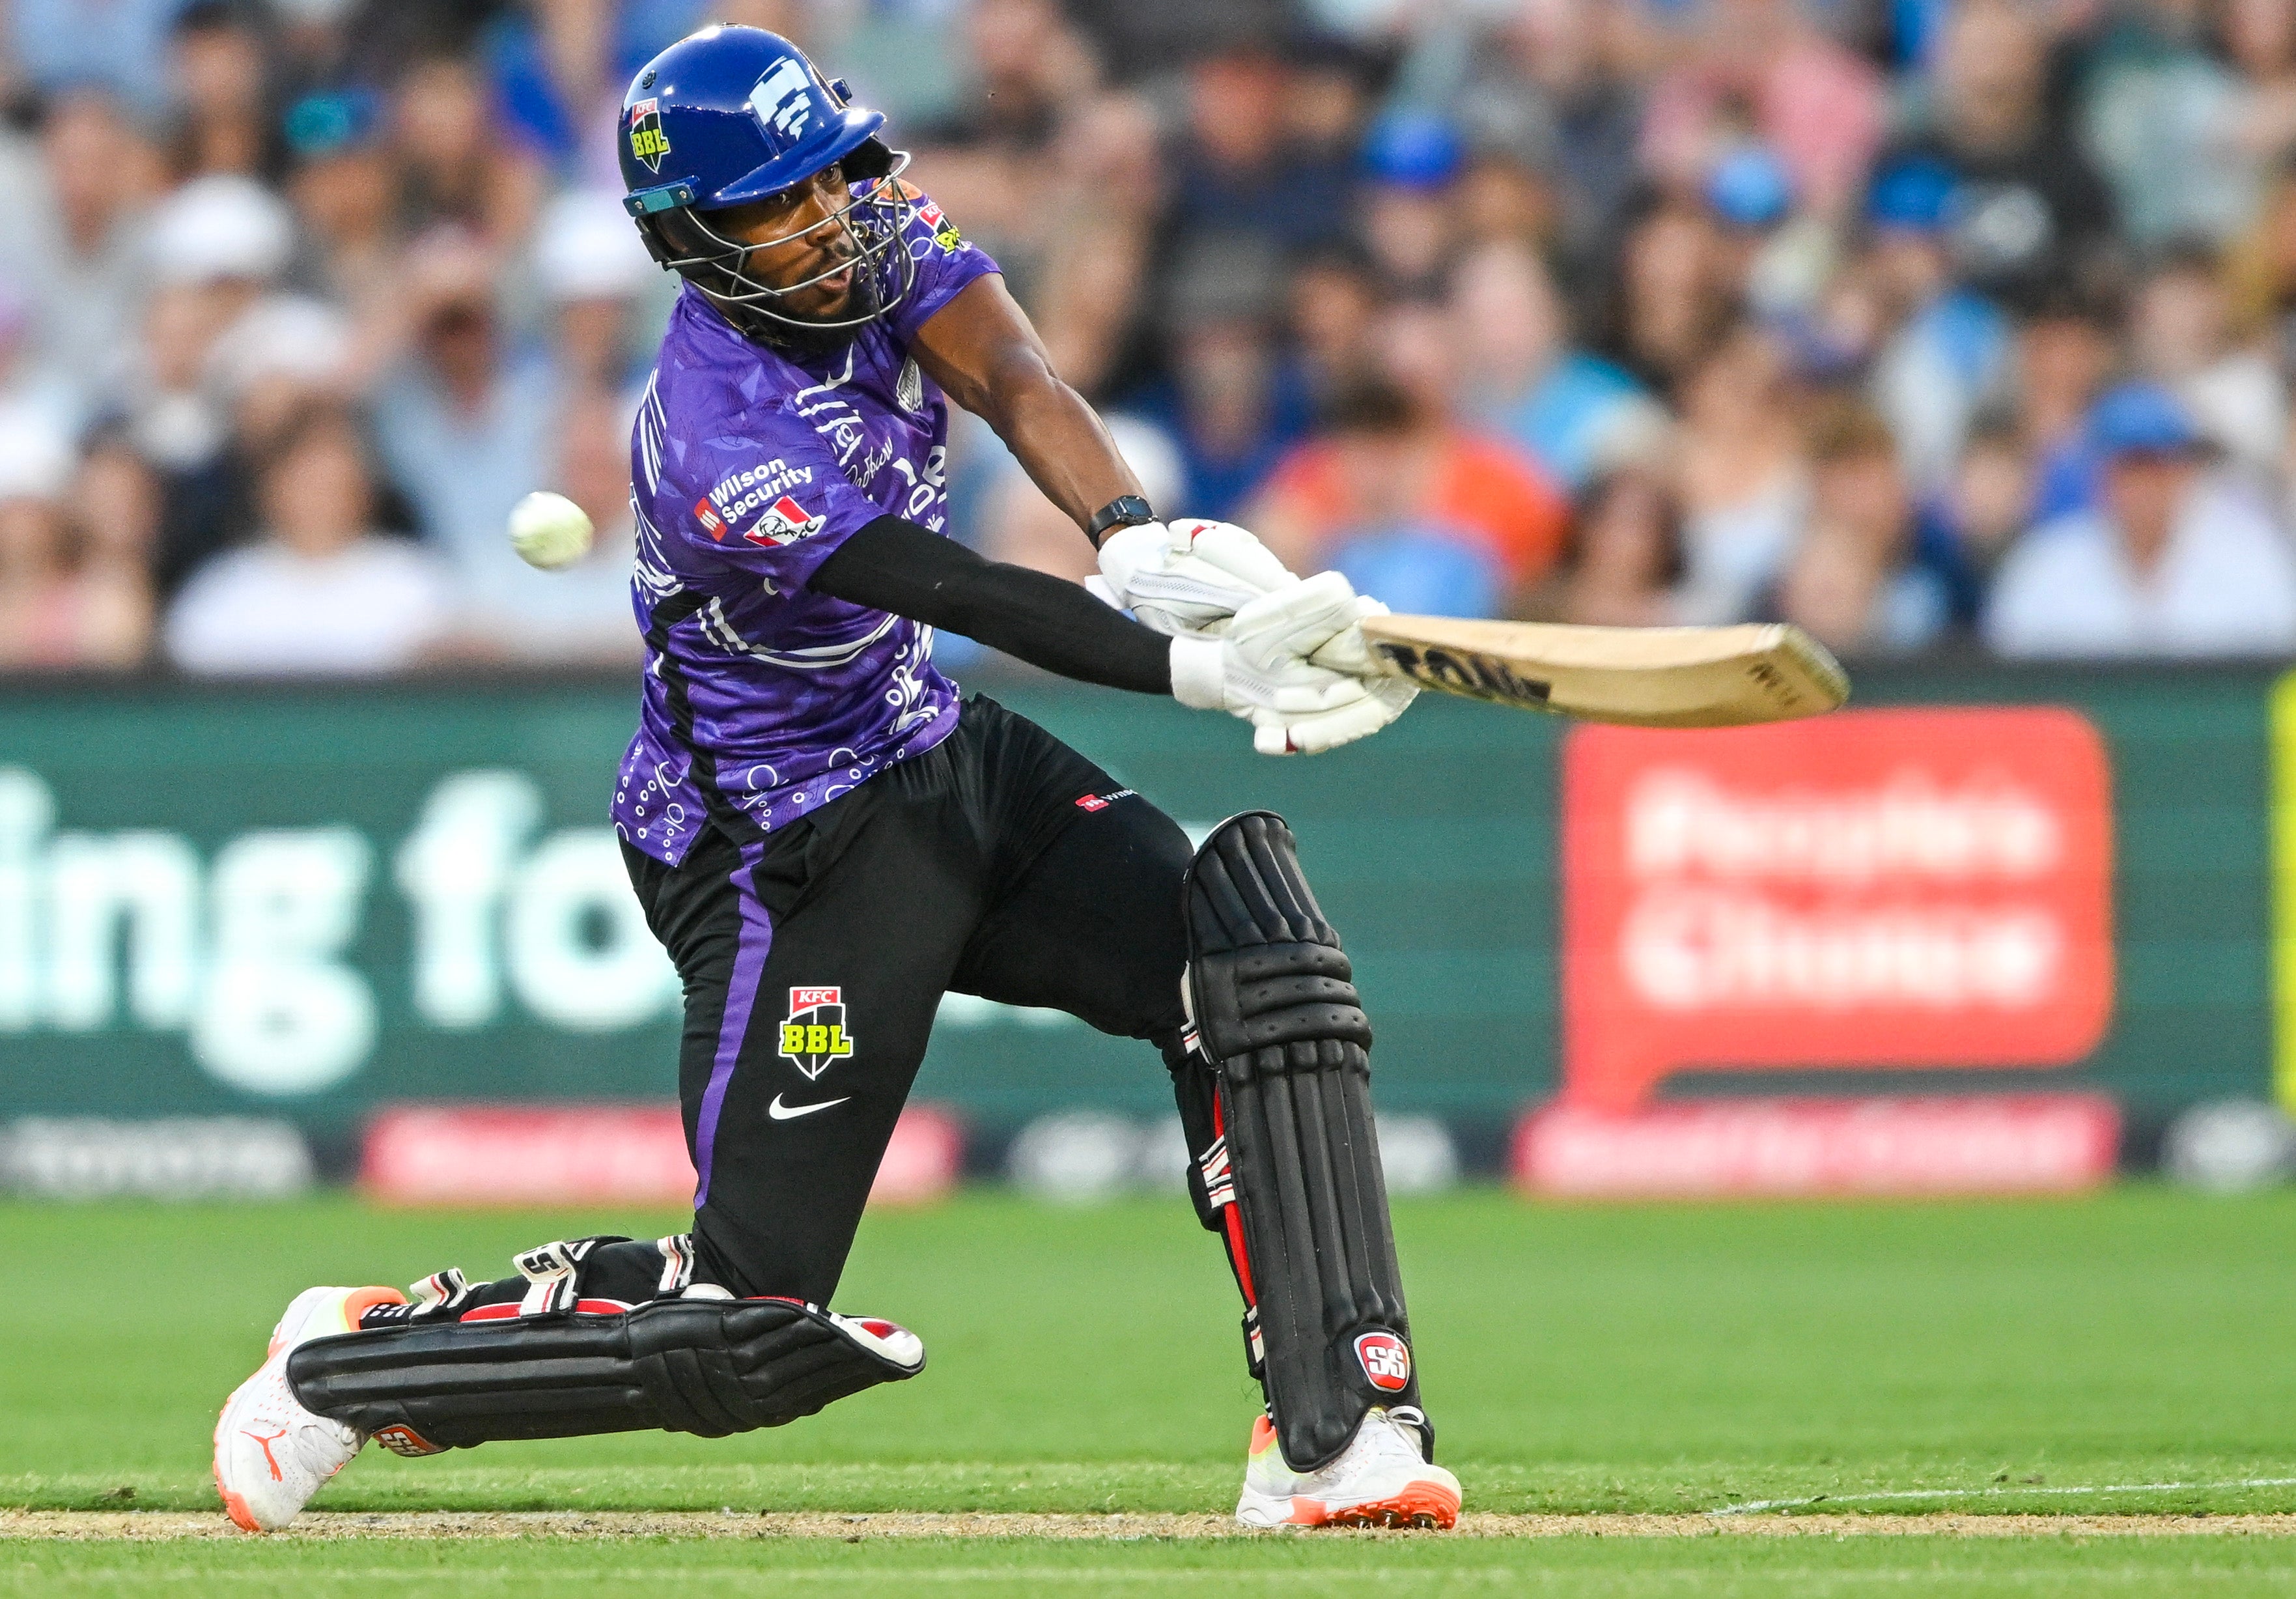 Chris Jordan has been partly chosen because of his ability with the bat